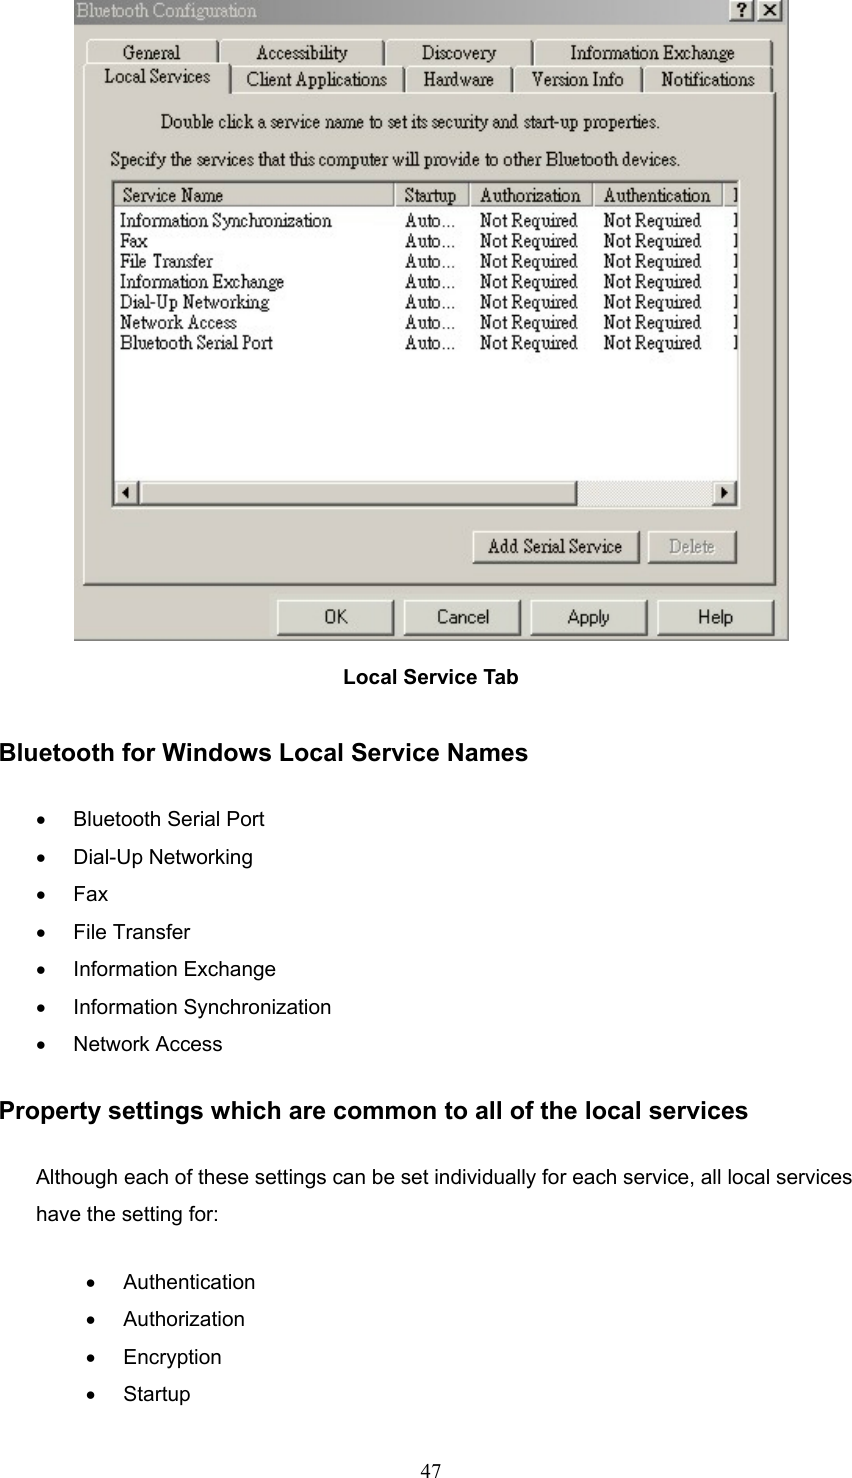  47  Local Service Tab  Bluetooth for Windows Local Service Names •  Bluetooth Serial Port •  Dial-Up Networking •  Fax •  File Transfer •  Information Exchange •  Information Synchronization •  Network Access Property settings which are common to all of the local services Although each of these settings can be set individually for each service, all local services have the setting for: •  Authentication •  Authorization •  Encryption •  Startup 